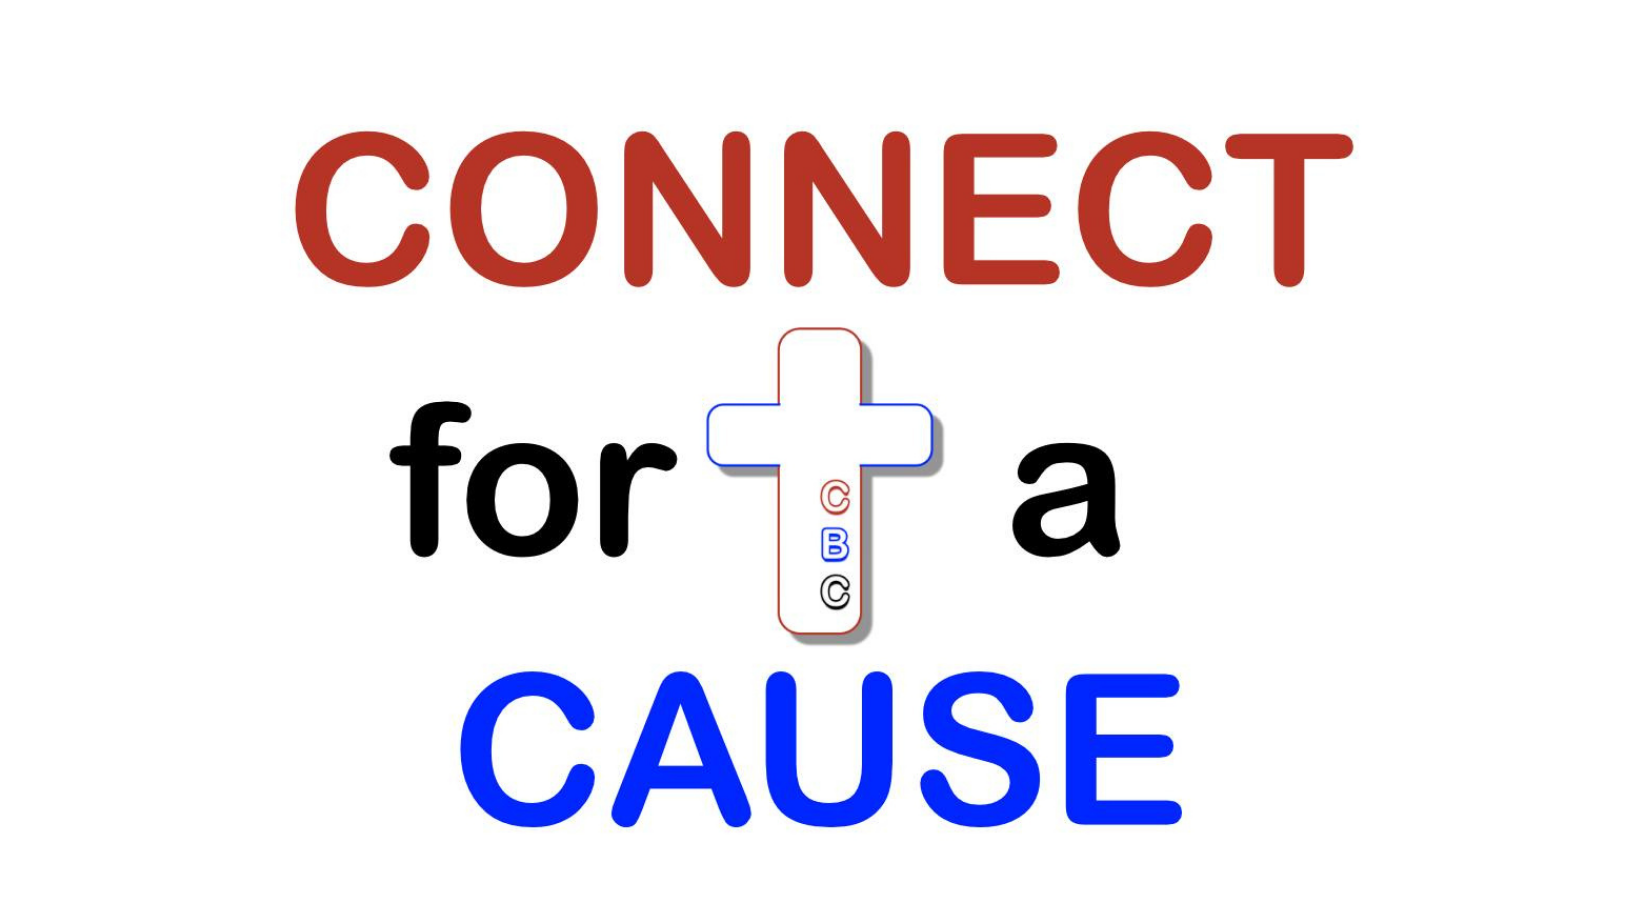 Connect 4 a cause